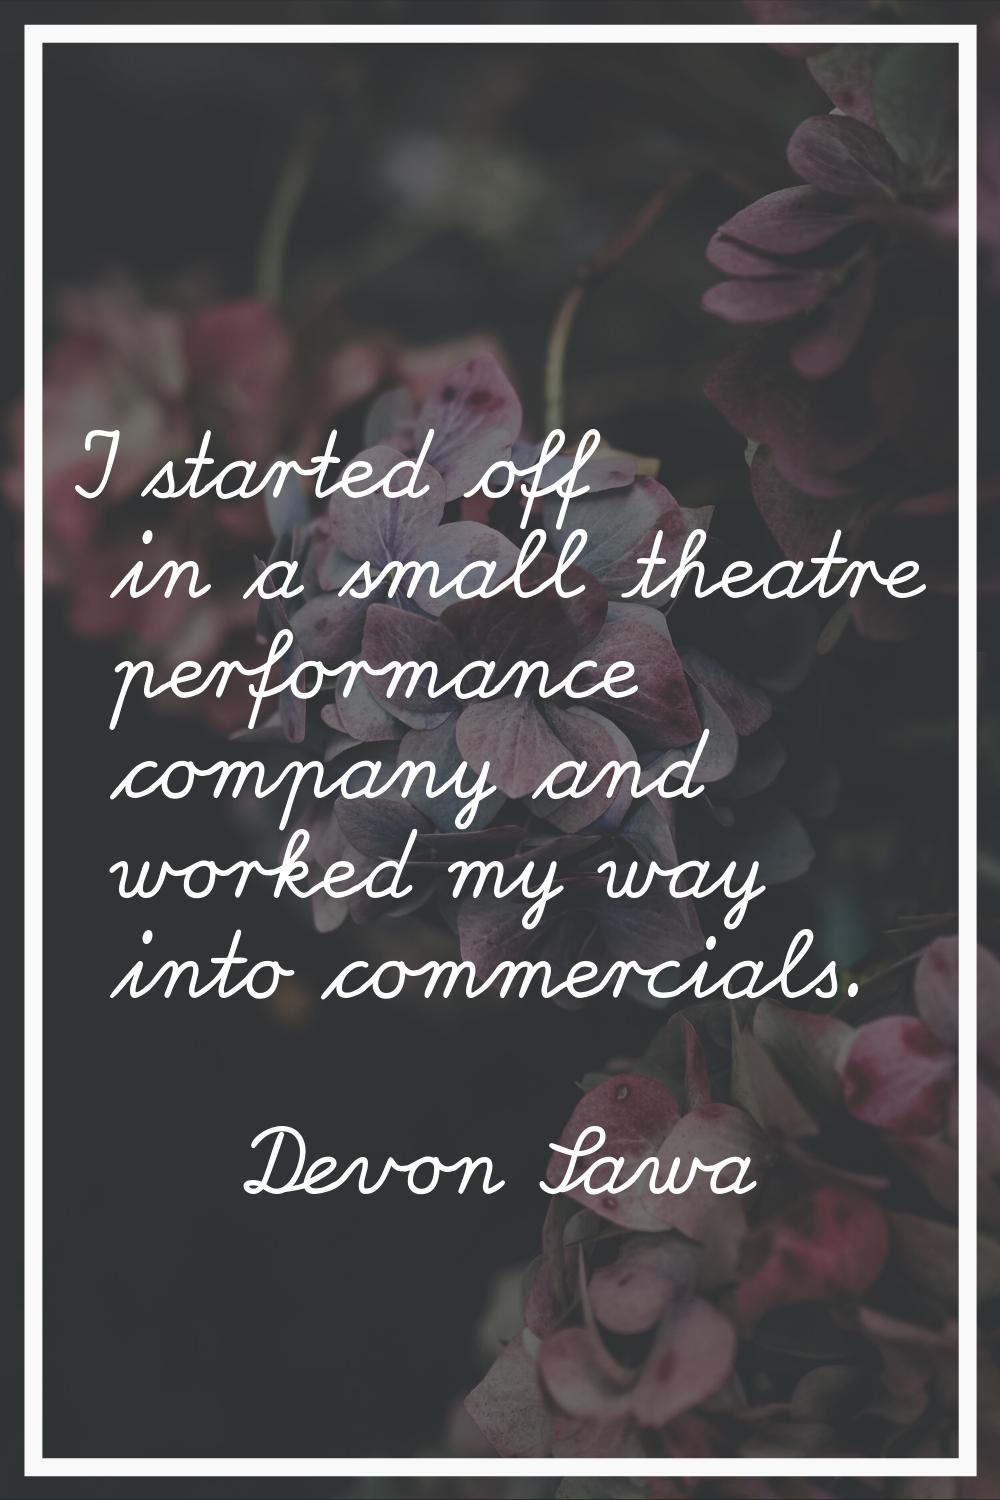 I started off in a small theatre performance company and worked my way into commercials.